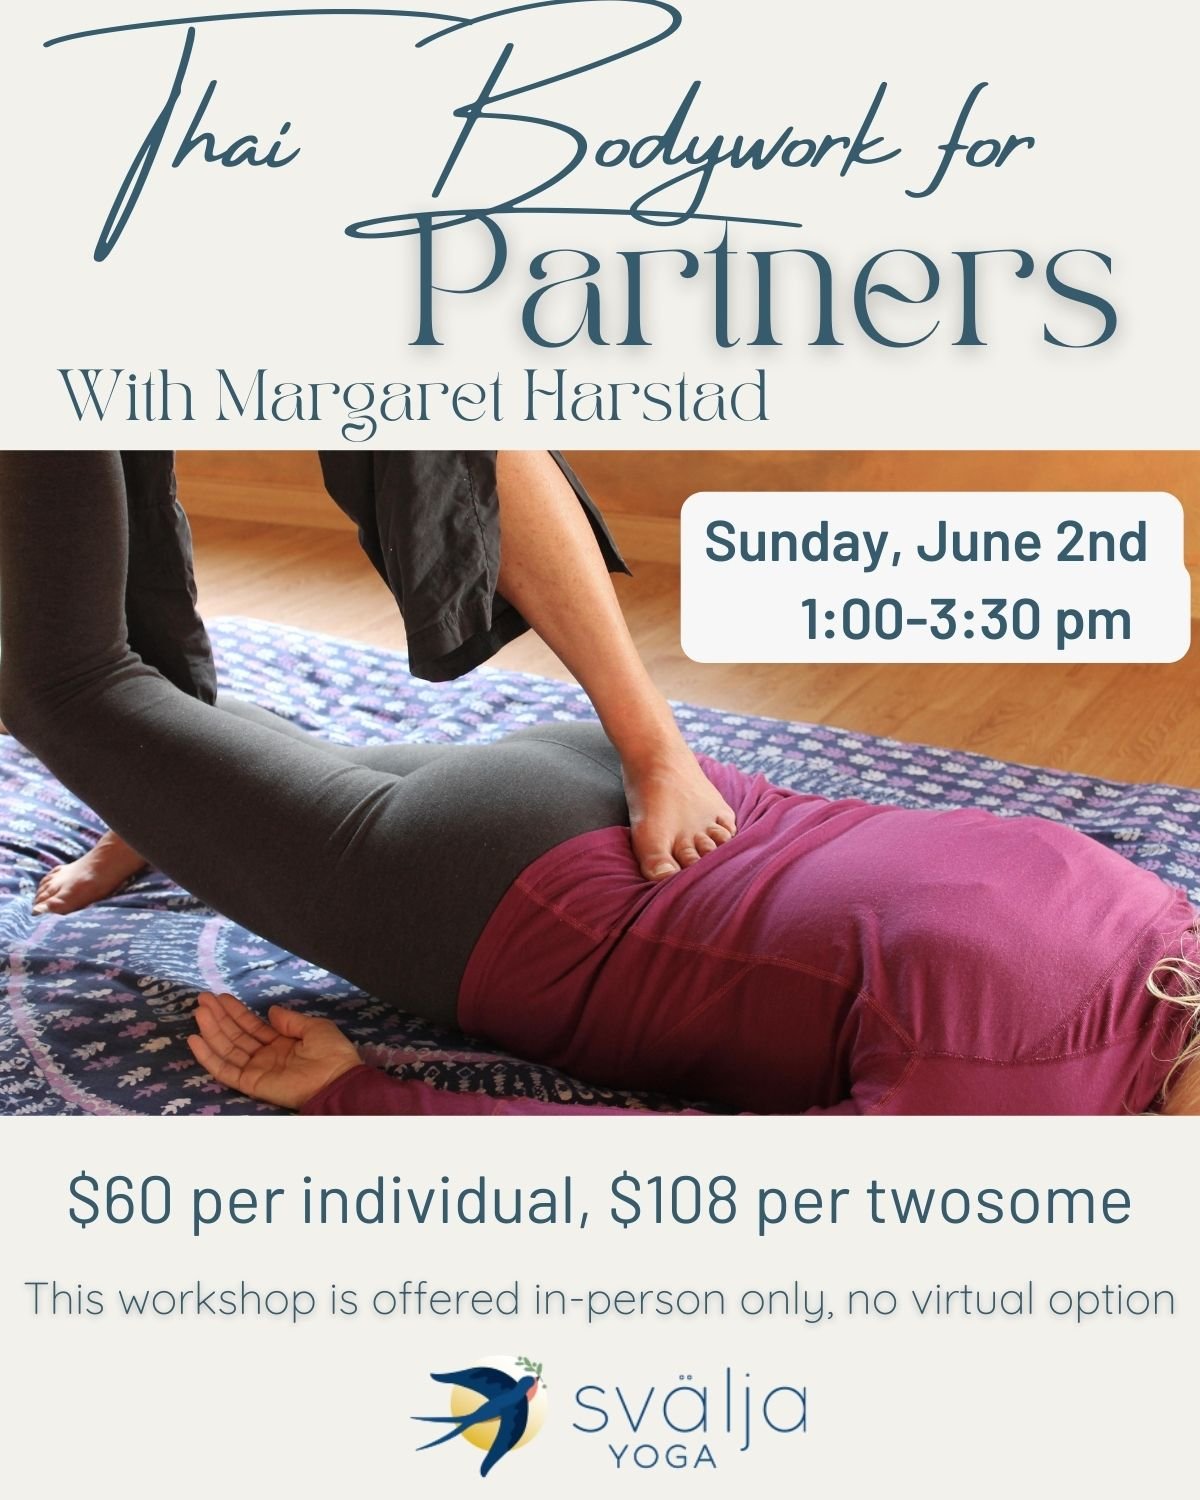 Intro to Thai Bodywork
Sunday, June 2nd
1:00 - 3:30 pm 
w/ Margaret Harstad 
@muggymoose 

$60 for an individual
OR
$108 for a twosome
this workshop is offered in-person only

Based on the northern style of Traditional Style of Thai Massage (Nuad Bor